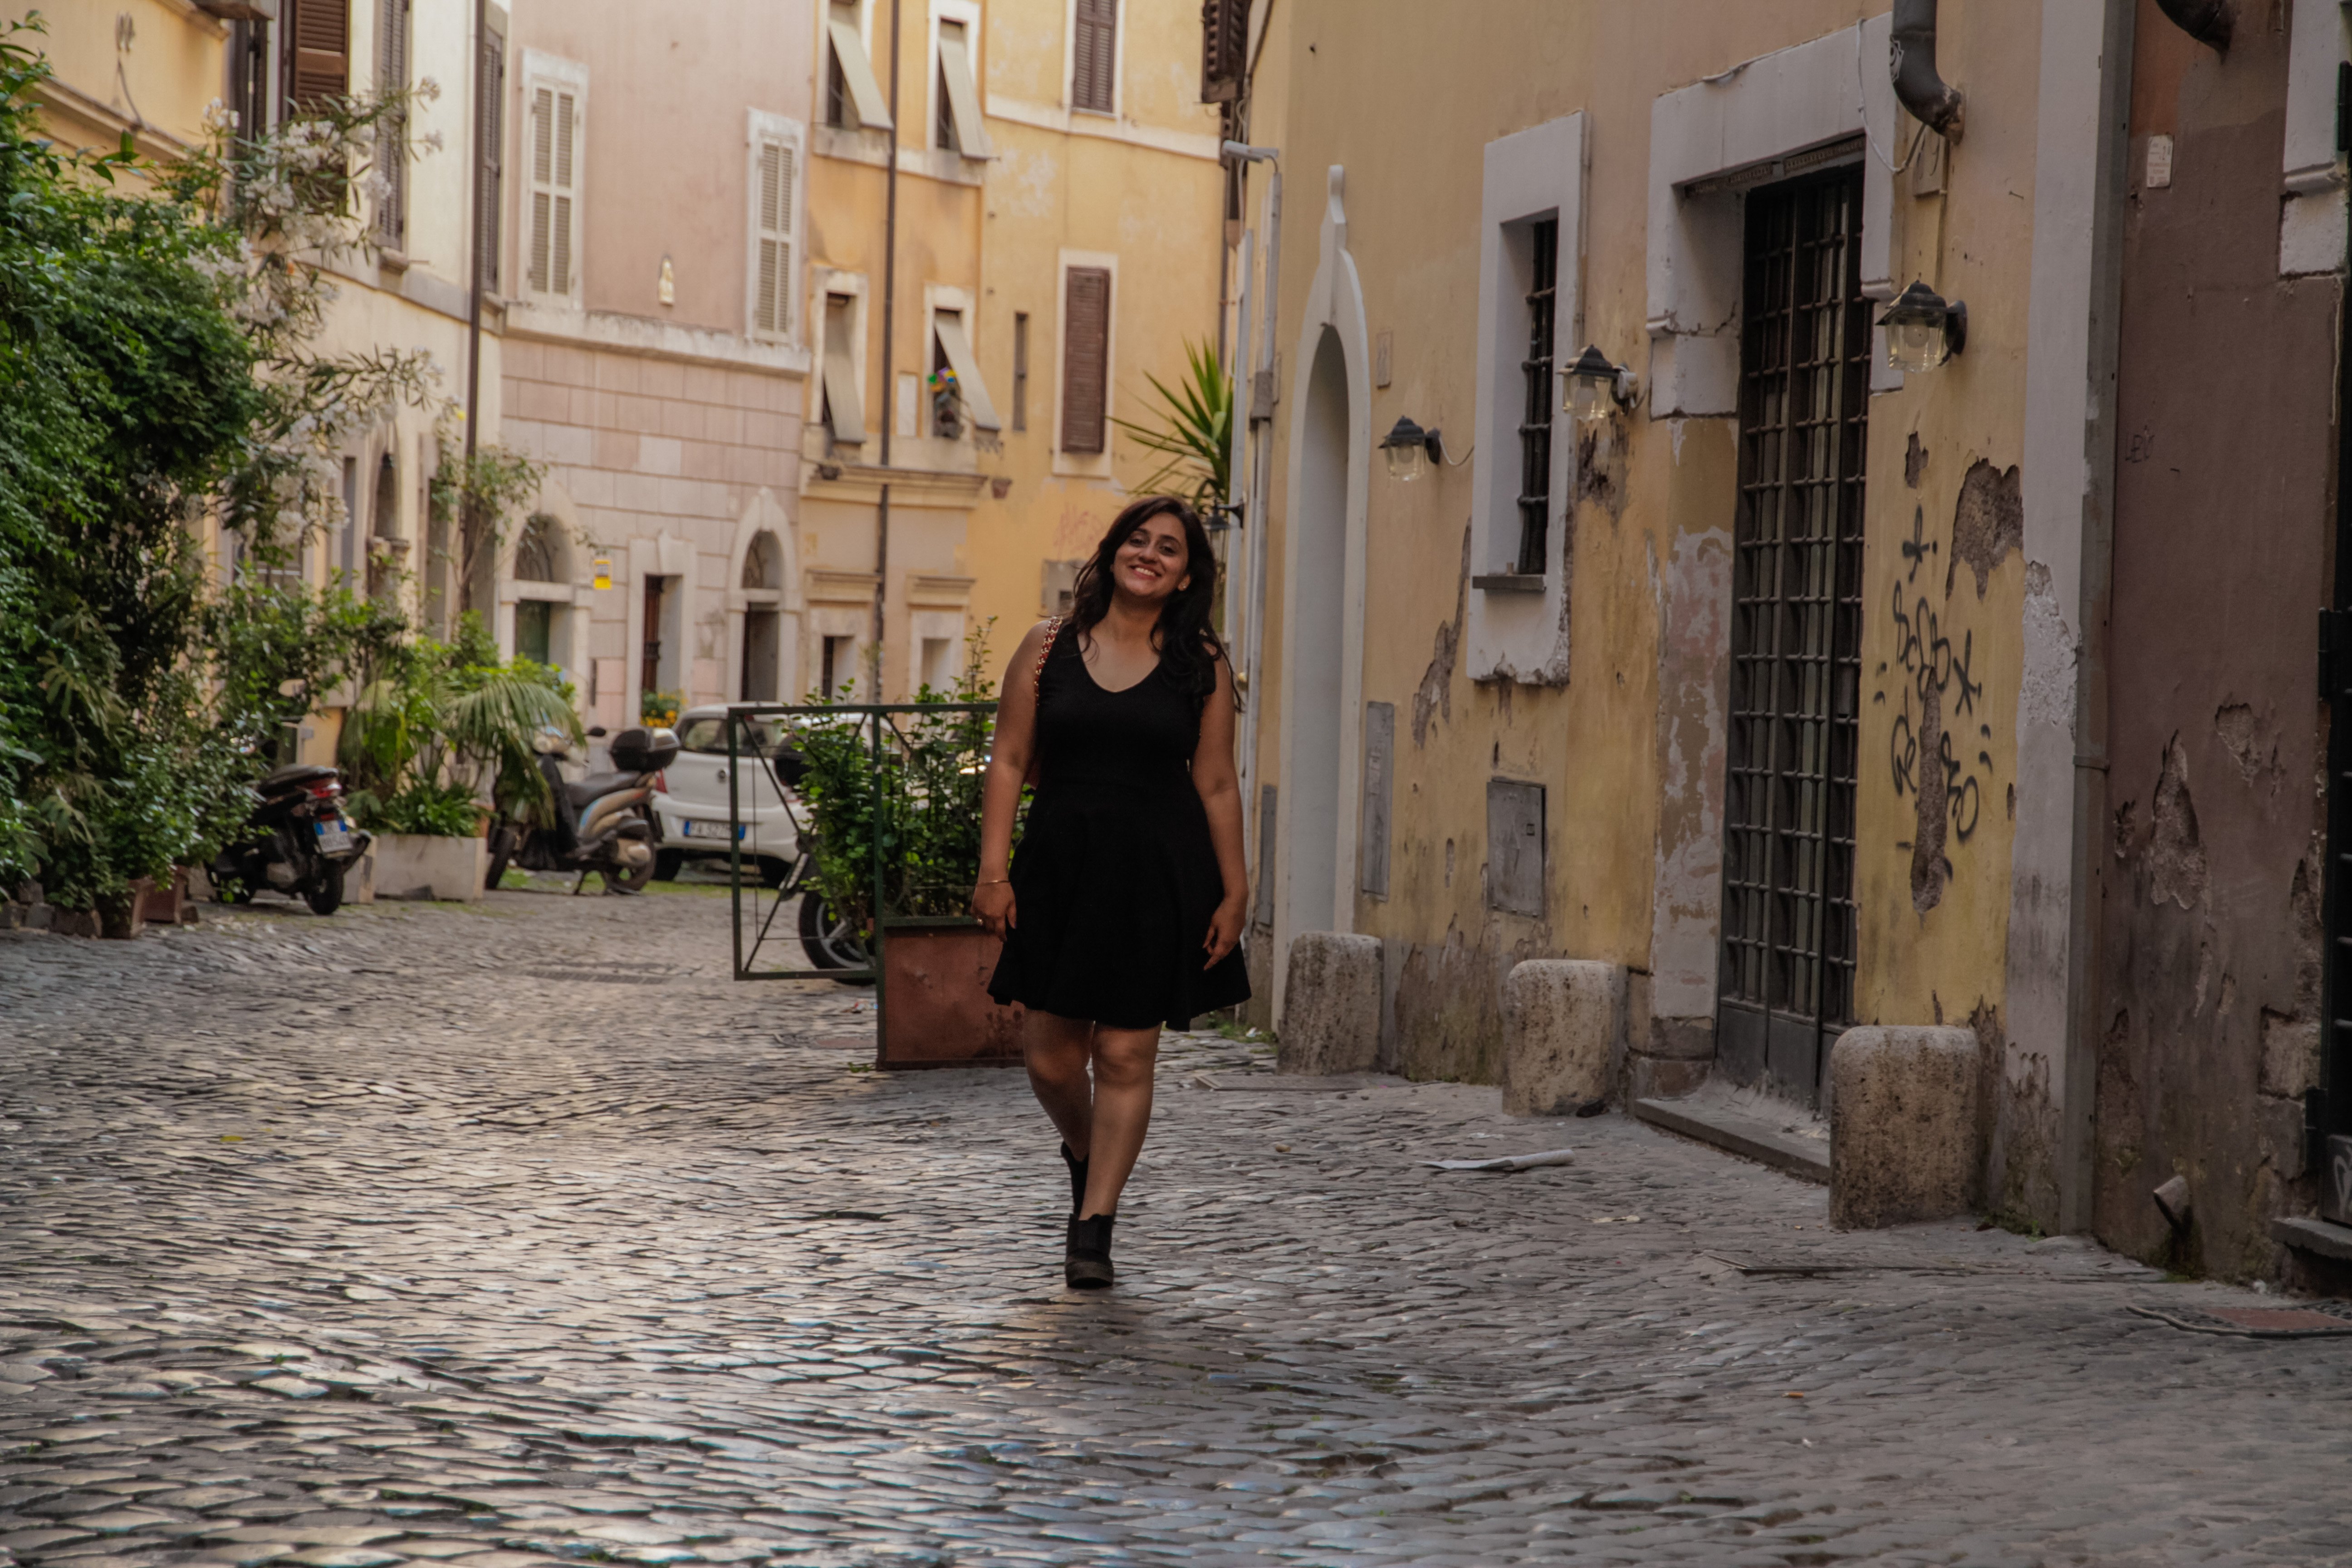 Female solo travel tips for Italy